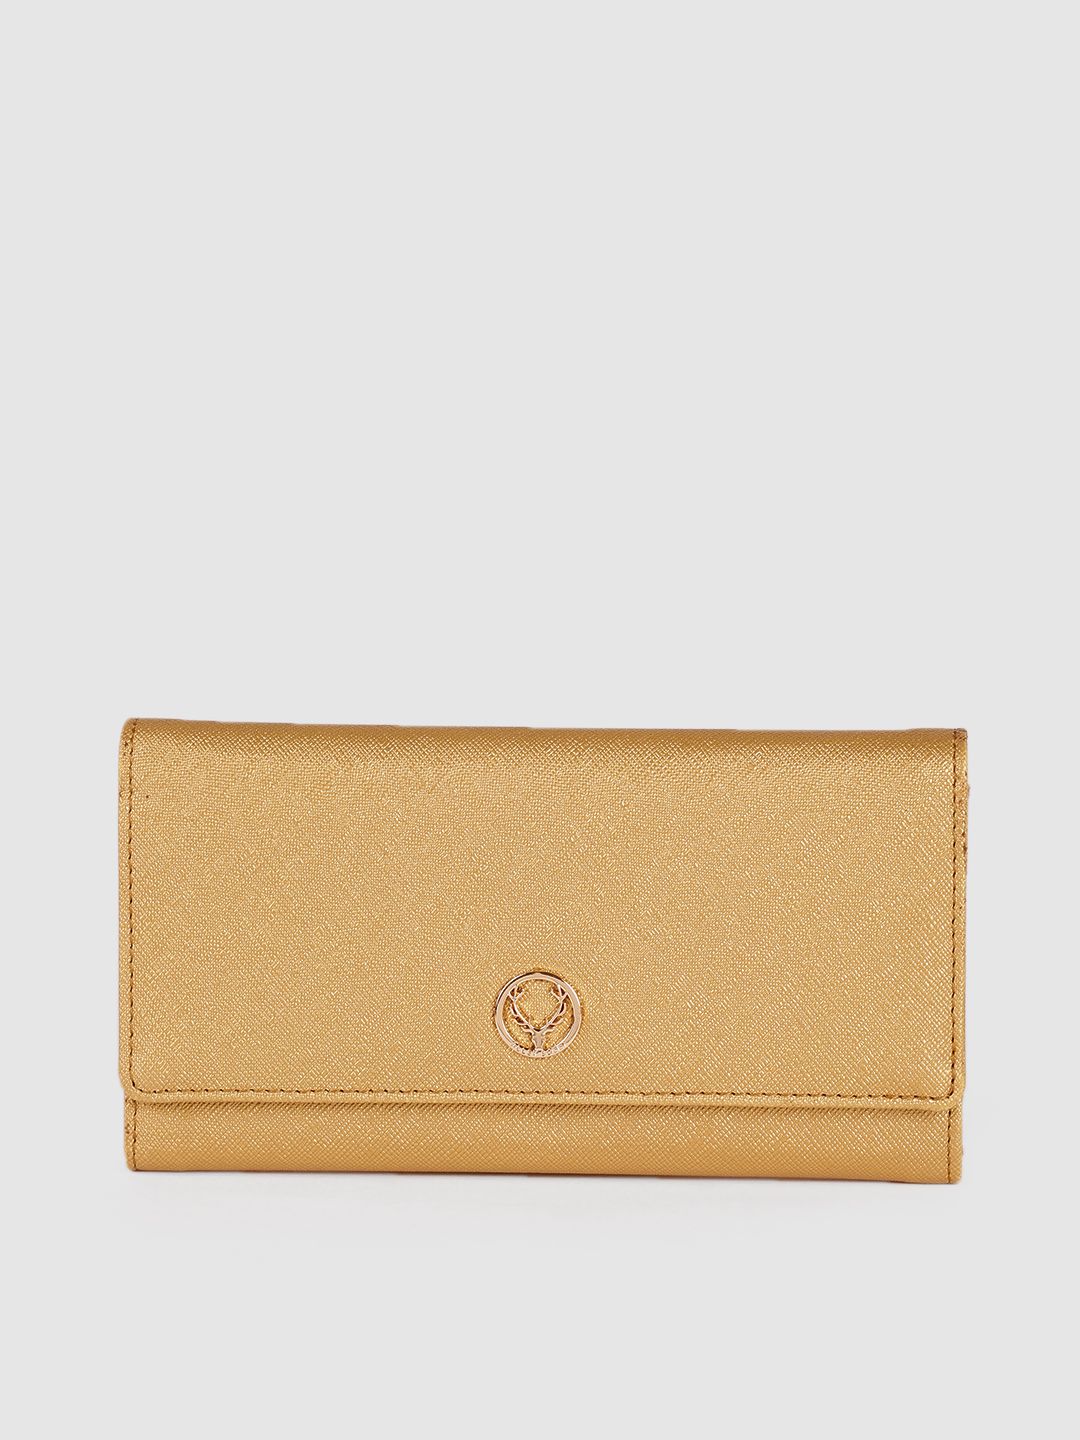 Allen Solly Women Gold-Toned PU Two Fold Wallet Price in India